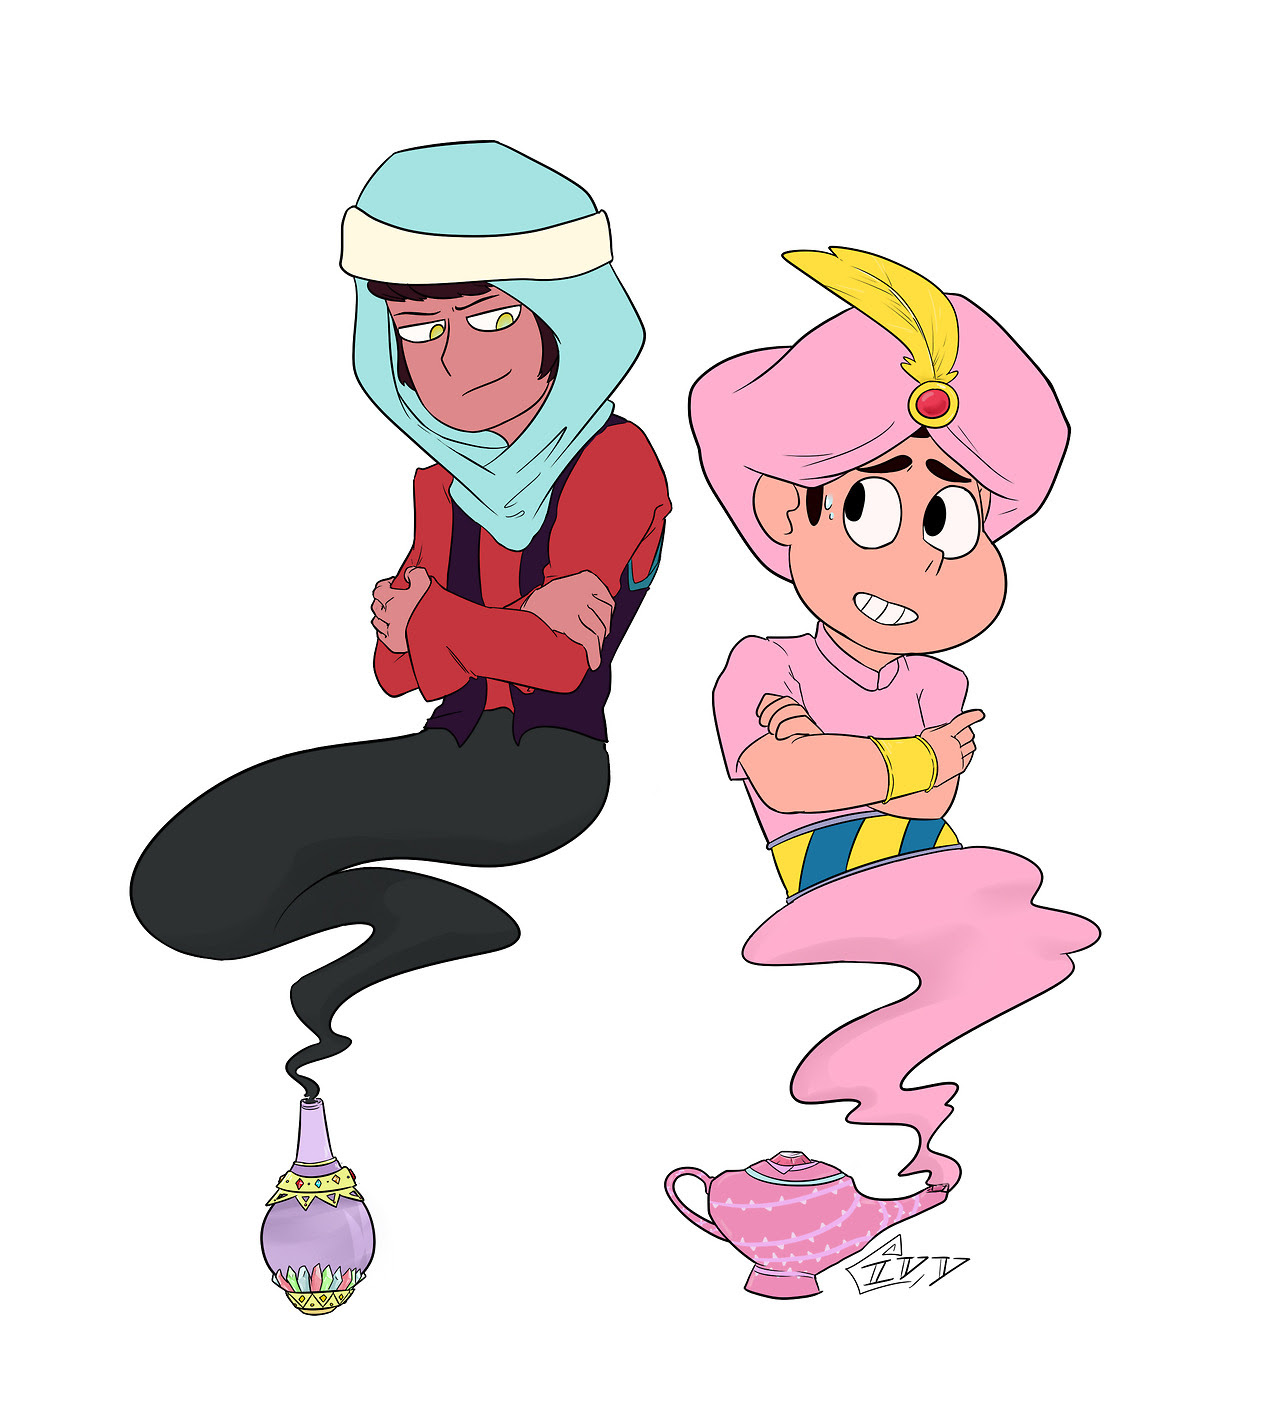 commissioned by @ironbar36​ to do their genie Steven universe AU, where Steven is half genie.